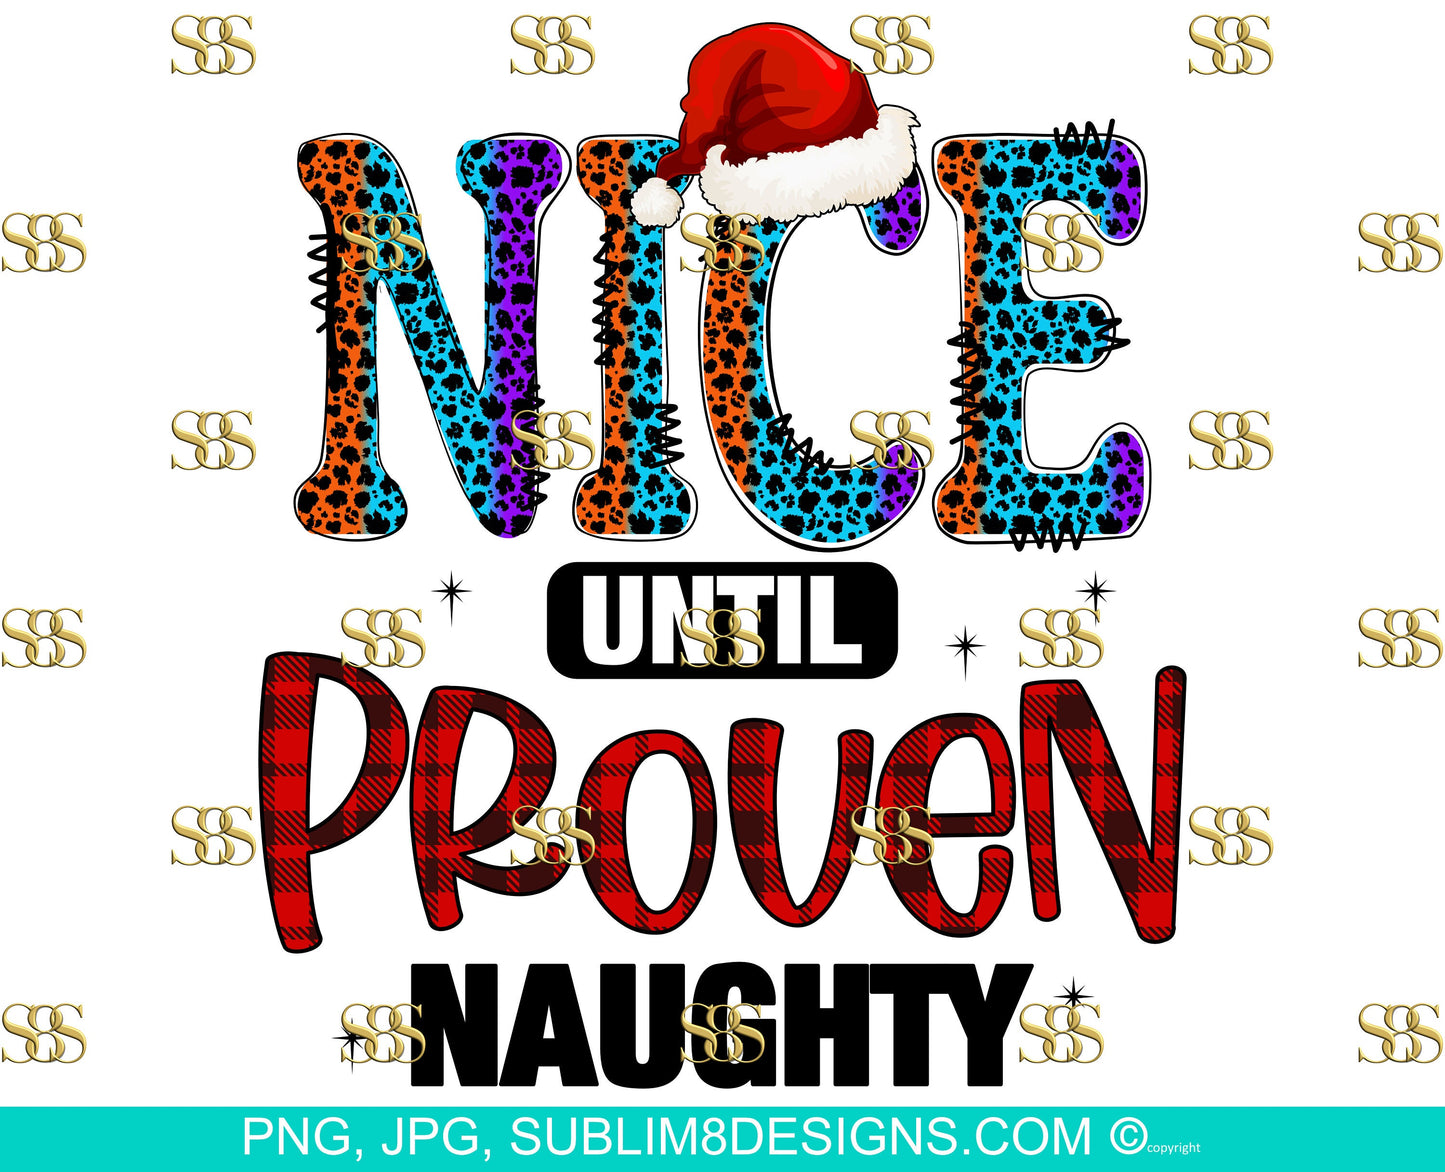 Nice Until Proven Naughty | Santa's List | Naughty or Nice png | Christmas Design | Sublimation Design PNG and JPG ONLY